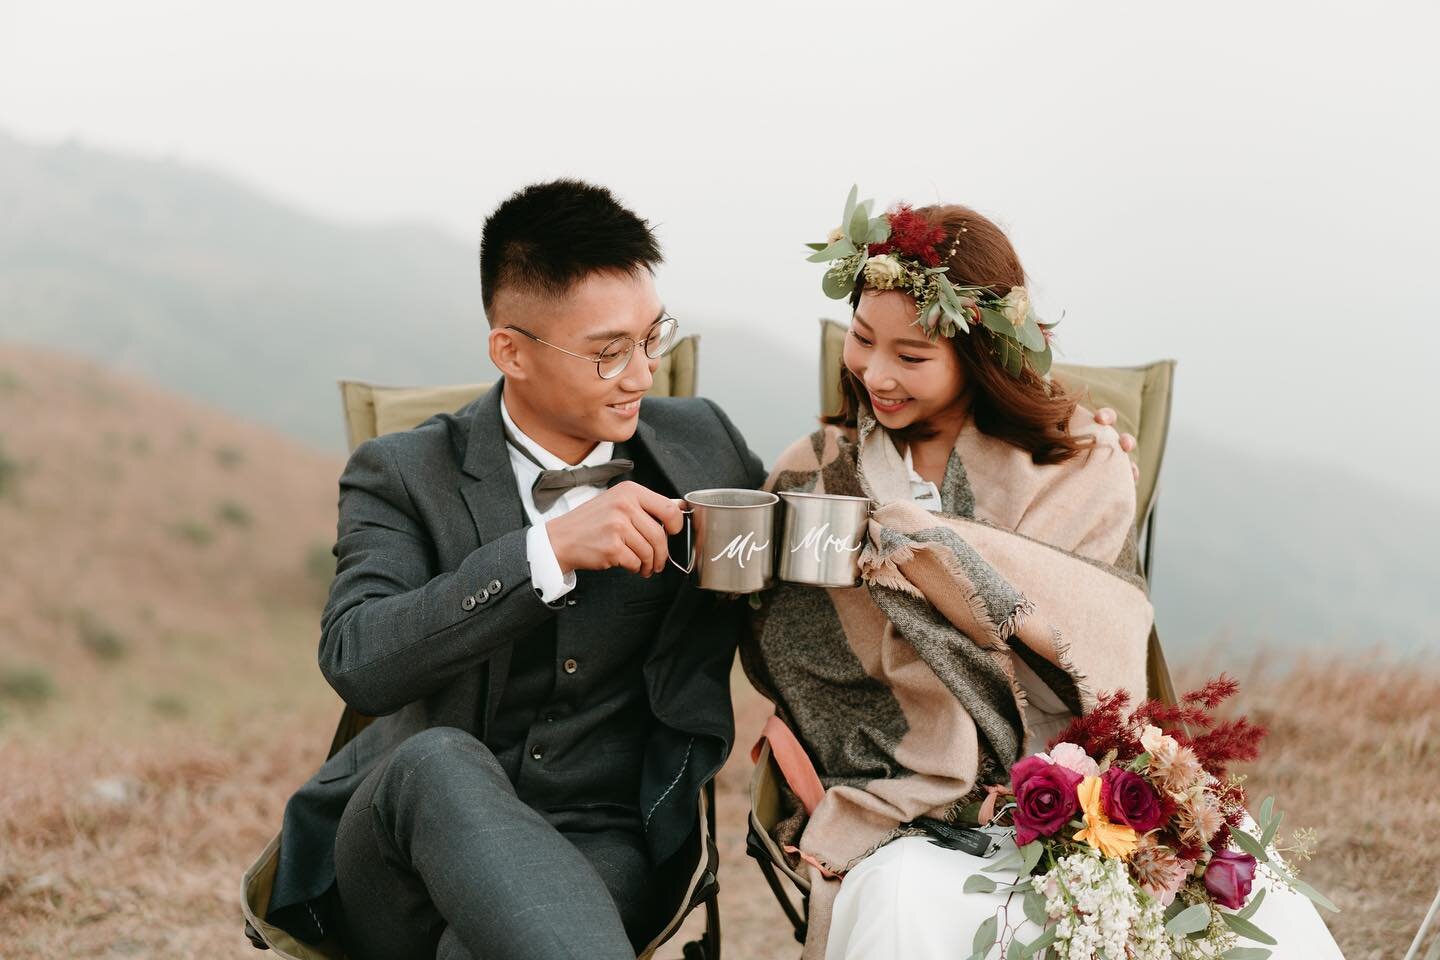 It takes hands to build a house but only hearts can build a home⛺️❣️
-
#elopewithkitography
#hongkongelopement
-
-
-
Photographer  @kitography_ @3arles 
MUA @sali_monjolimakeup
Gown @tulipa_wedding
Florist @makeyourchoicesss_floralab
Ribbon @immortal